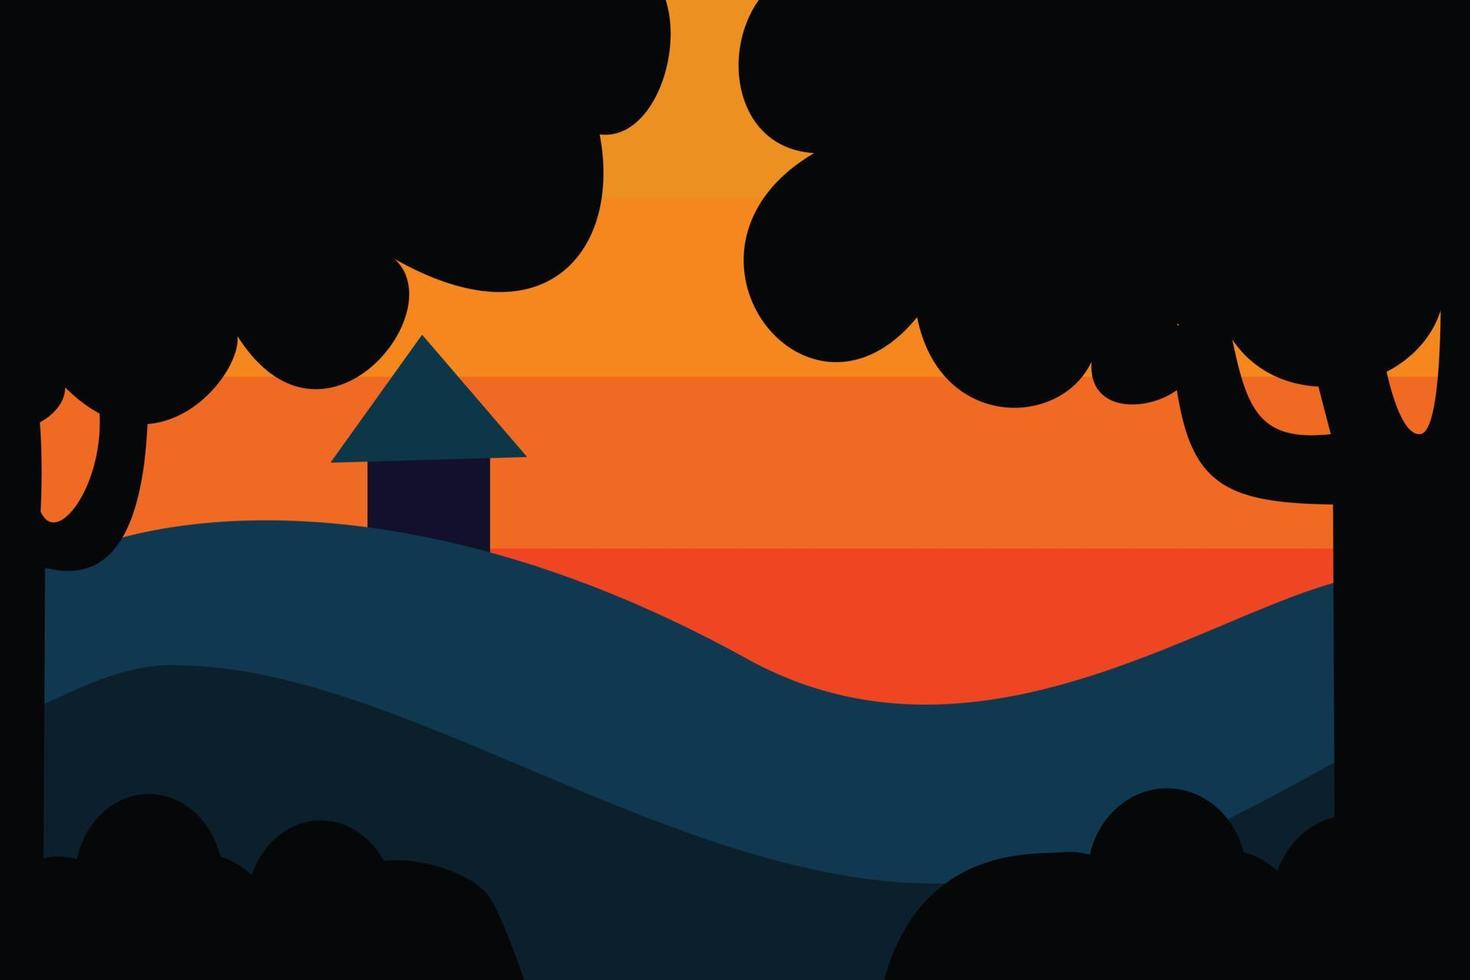 Sunset in countryside with flat design landscape illustration vector